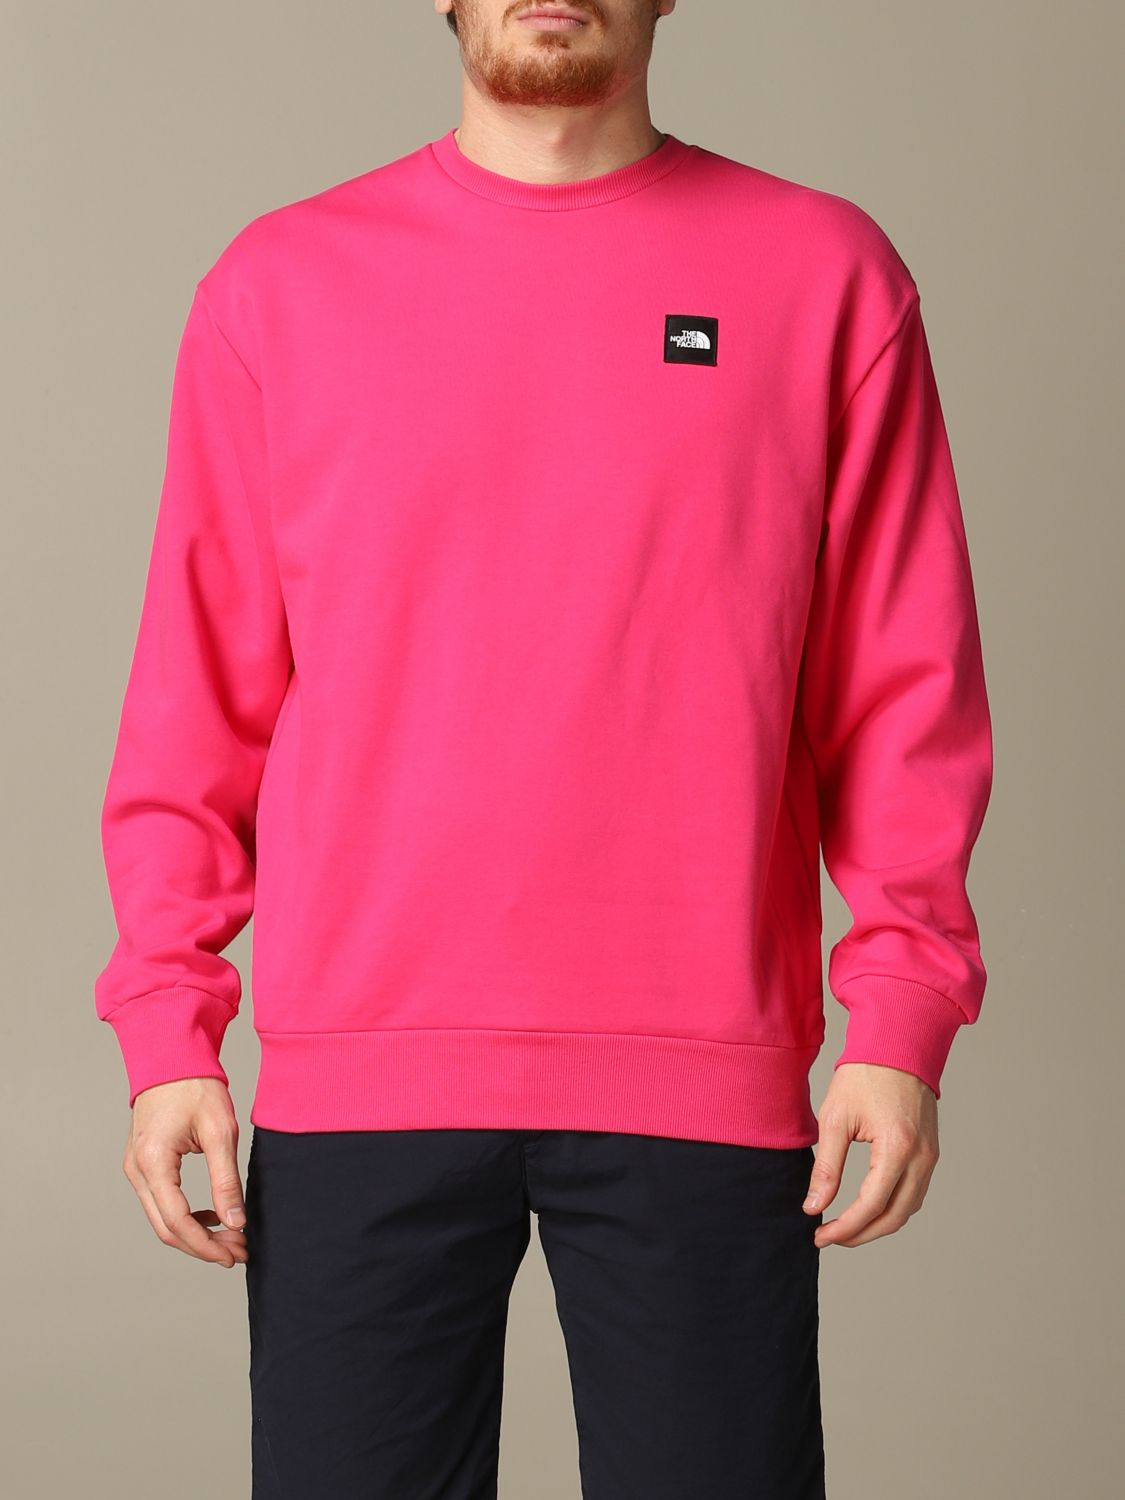 north face sweaters for men